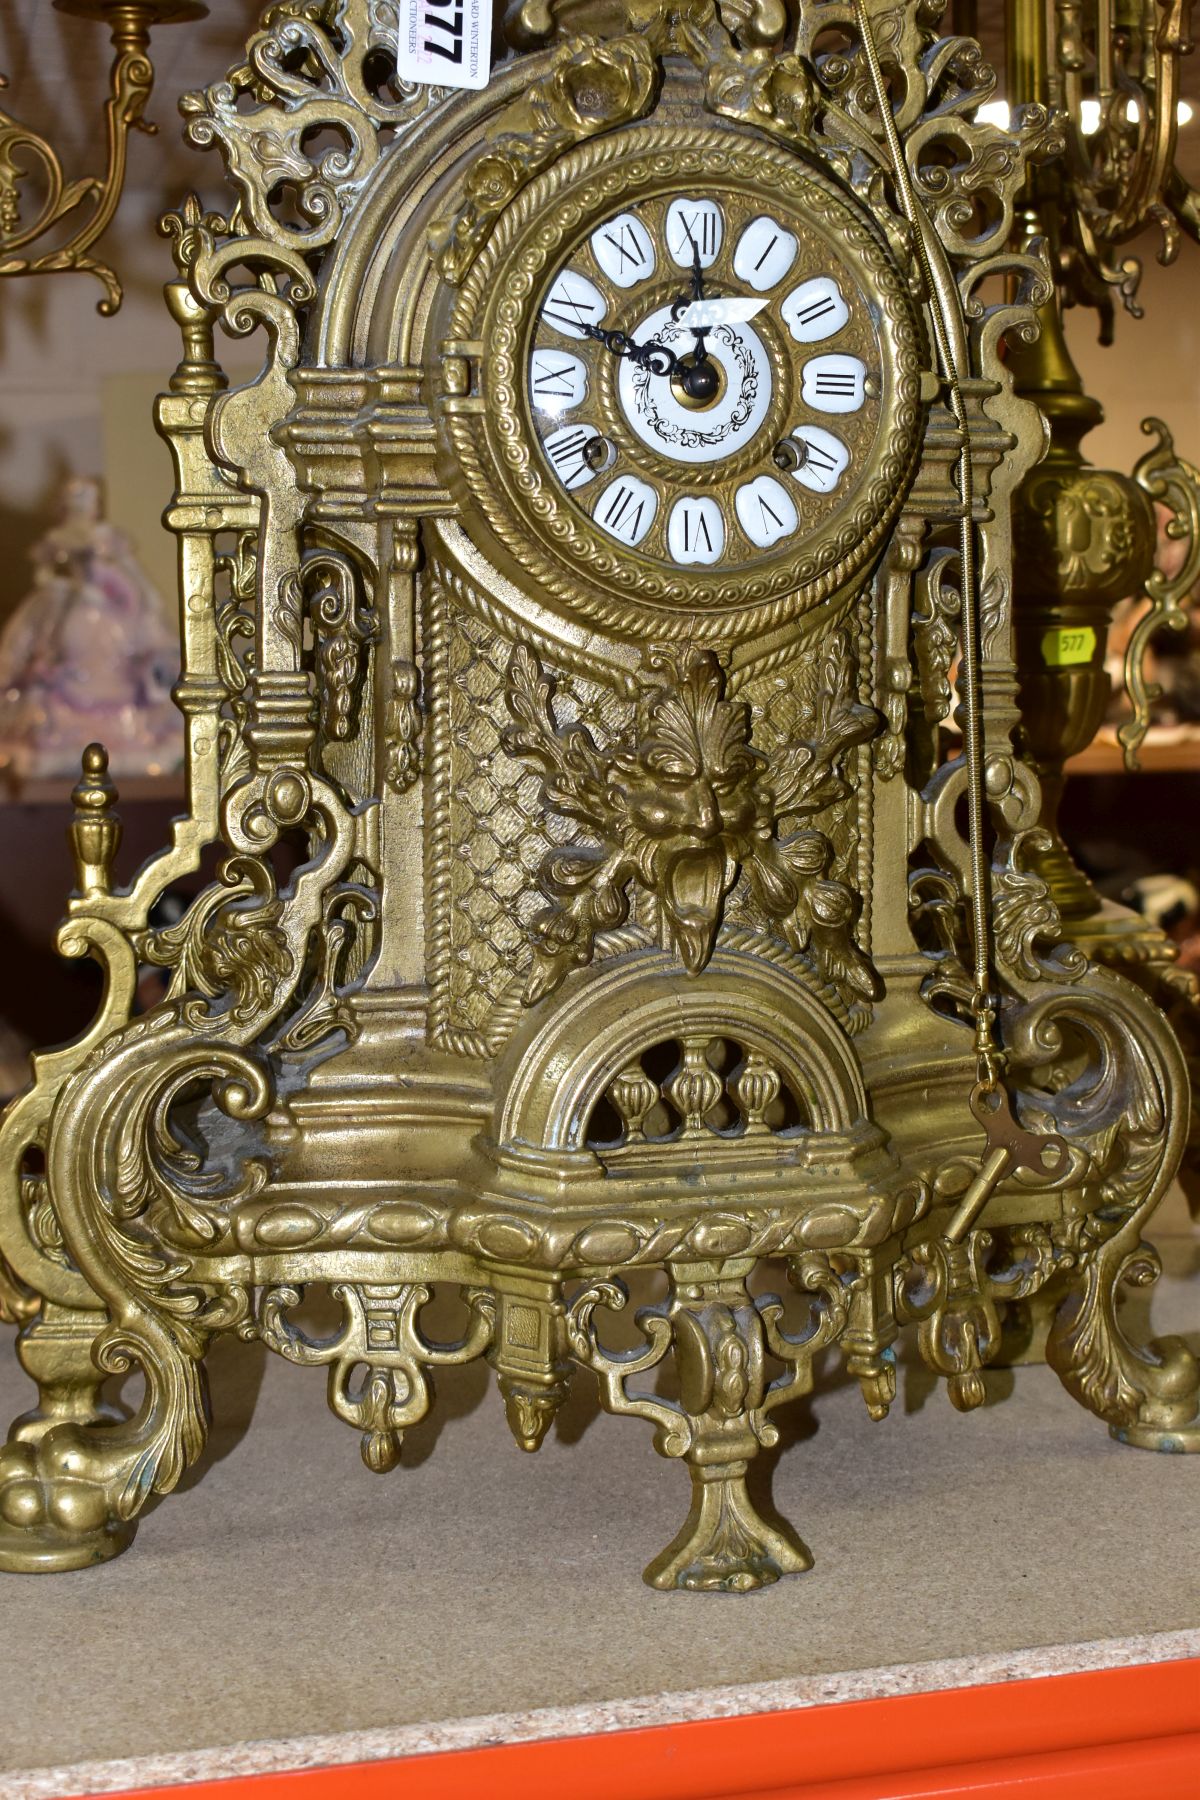 A REPRODUCTION BRASS CLOCK GARNITURE, the clock with ornate cast brass case with twin handled urn - Image 5 of 9